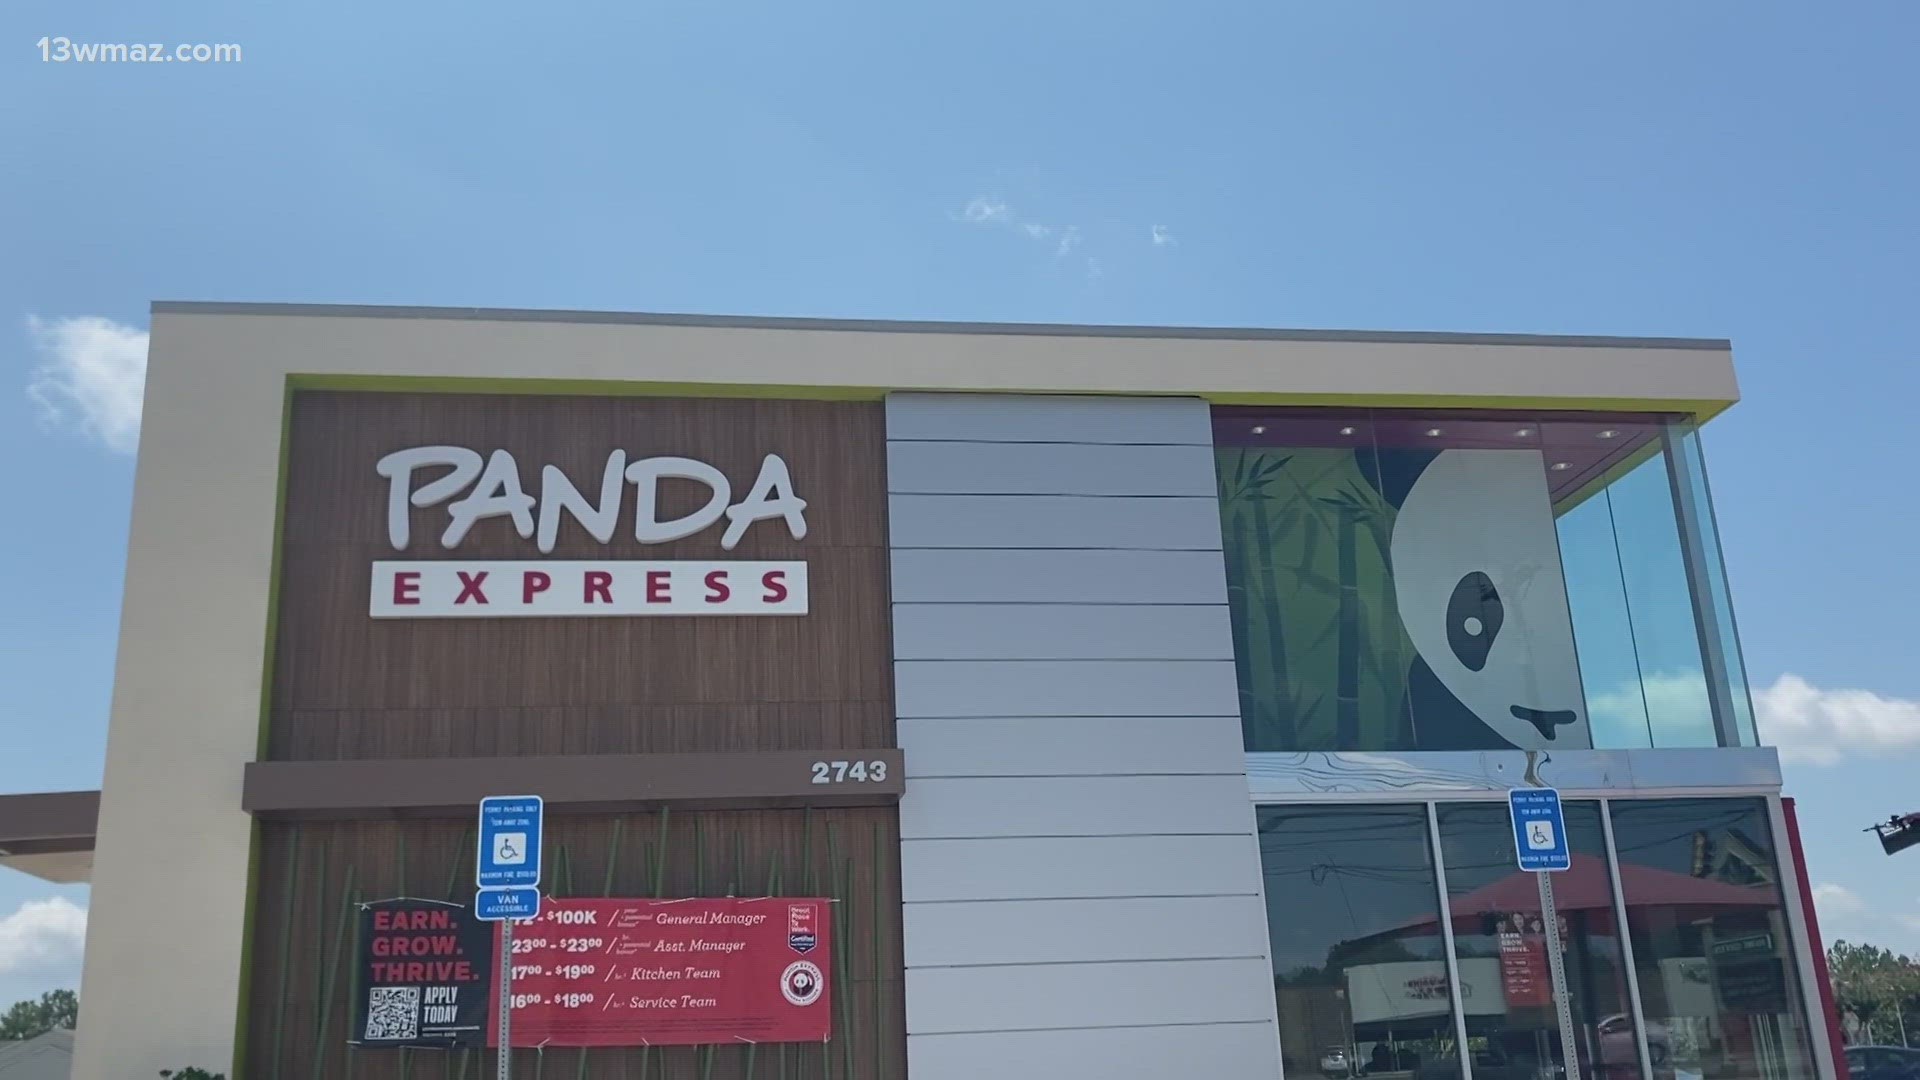 Here's where you fit into Panda Express' efforts to help children at the Beverly Knight Olson Children's Hospital.